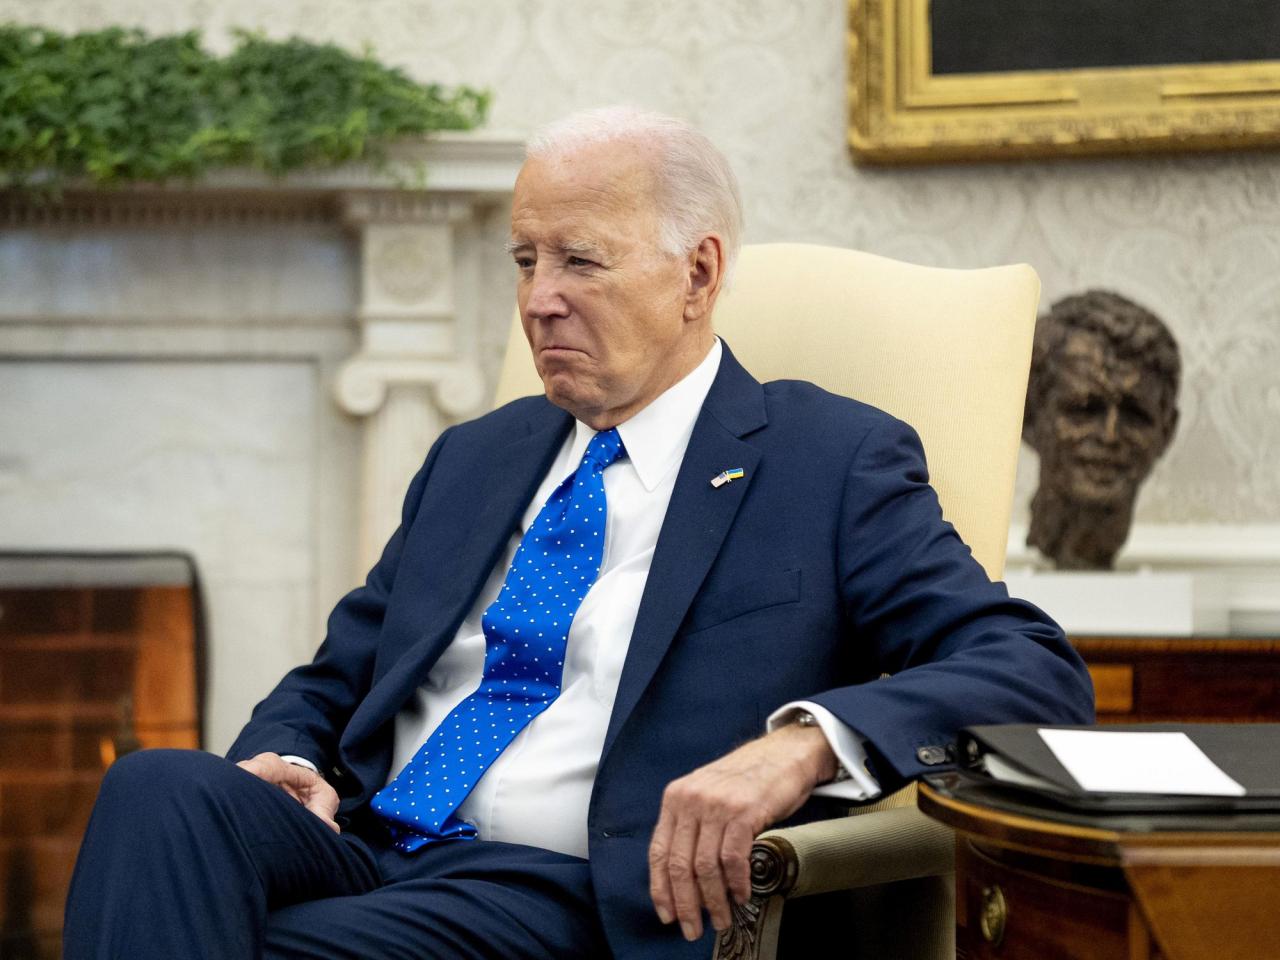 The Biden campaign has decided to join TikTok, despite the government's warning about potential national security risks associated with the app.